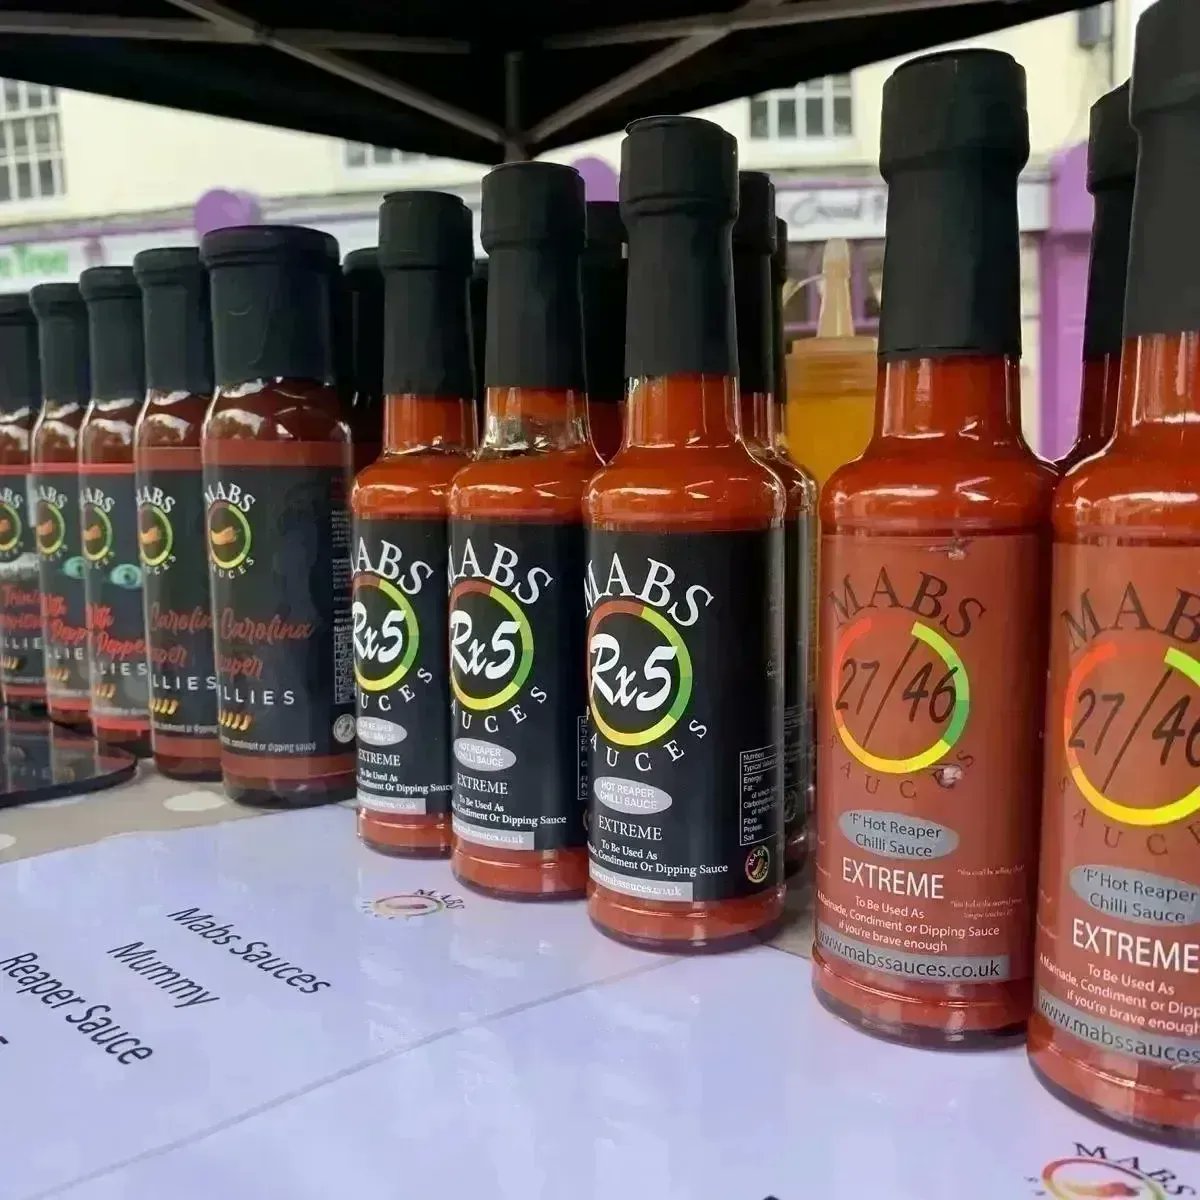 Mabssauces is set up at the Pentagon Shopping Centre in Chatham. #food #foodie #yummy #sweet #foodlover #delicious #sauces #chillisauces #BBQsauces #mild #medium #hot #veryhot #exceptionallyhot #cajun #extreme  #reaper #ghost #tablesauces #condiments #marinade #vegan #chillijam